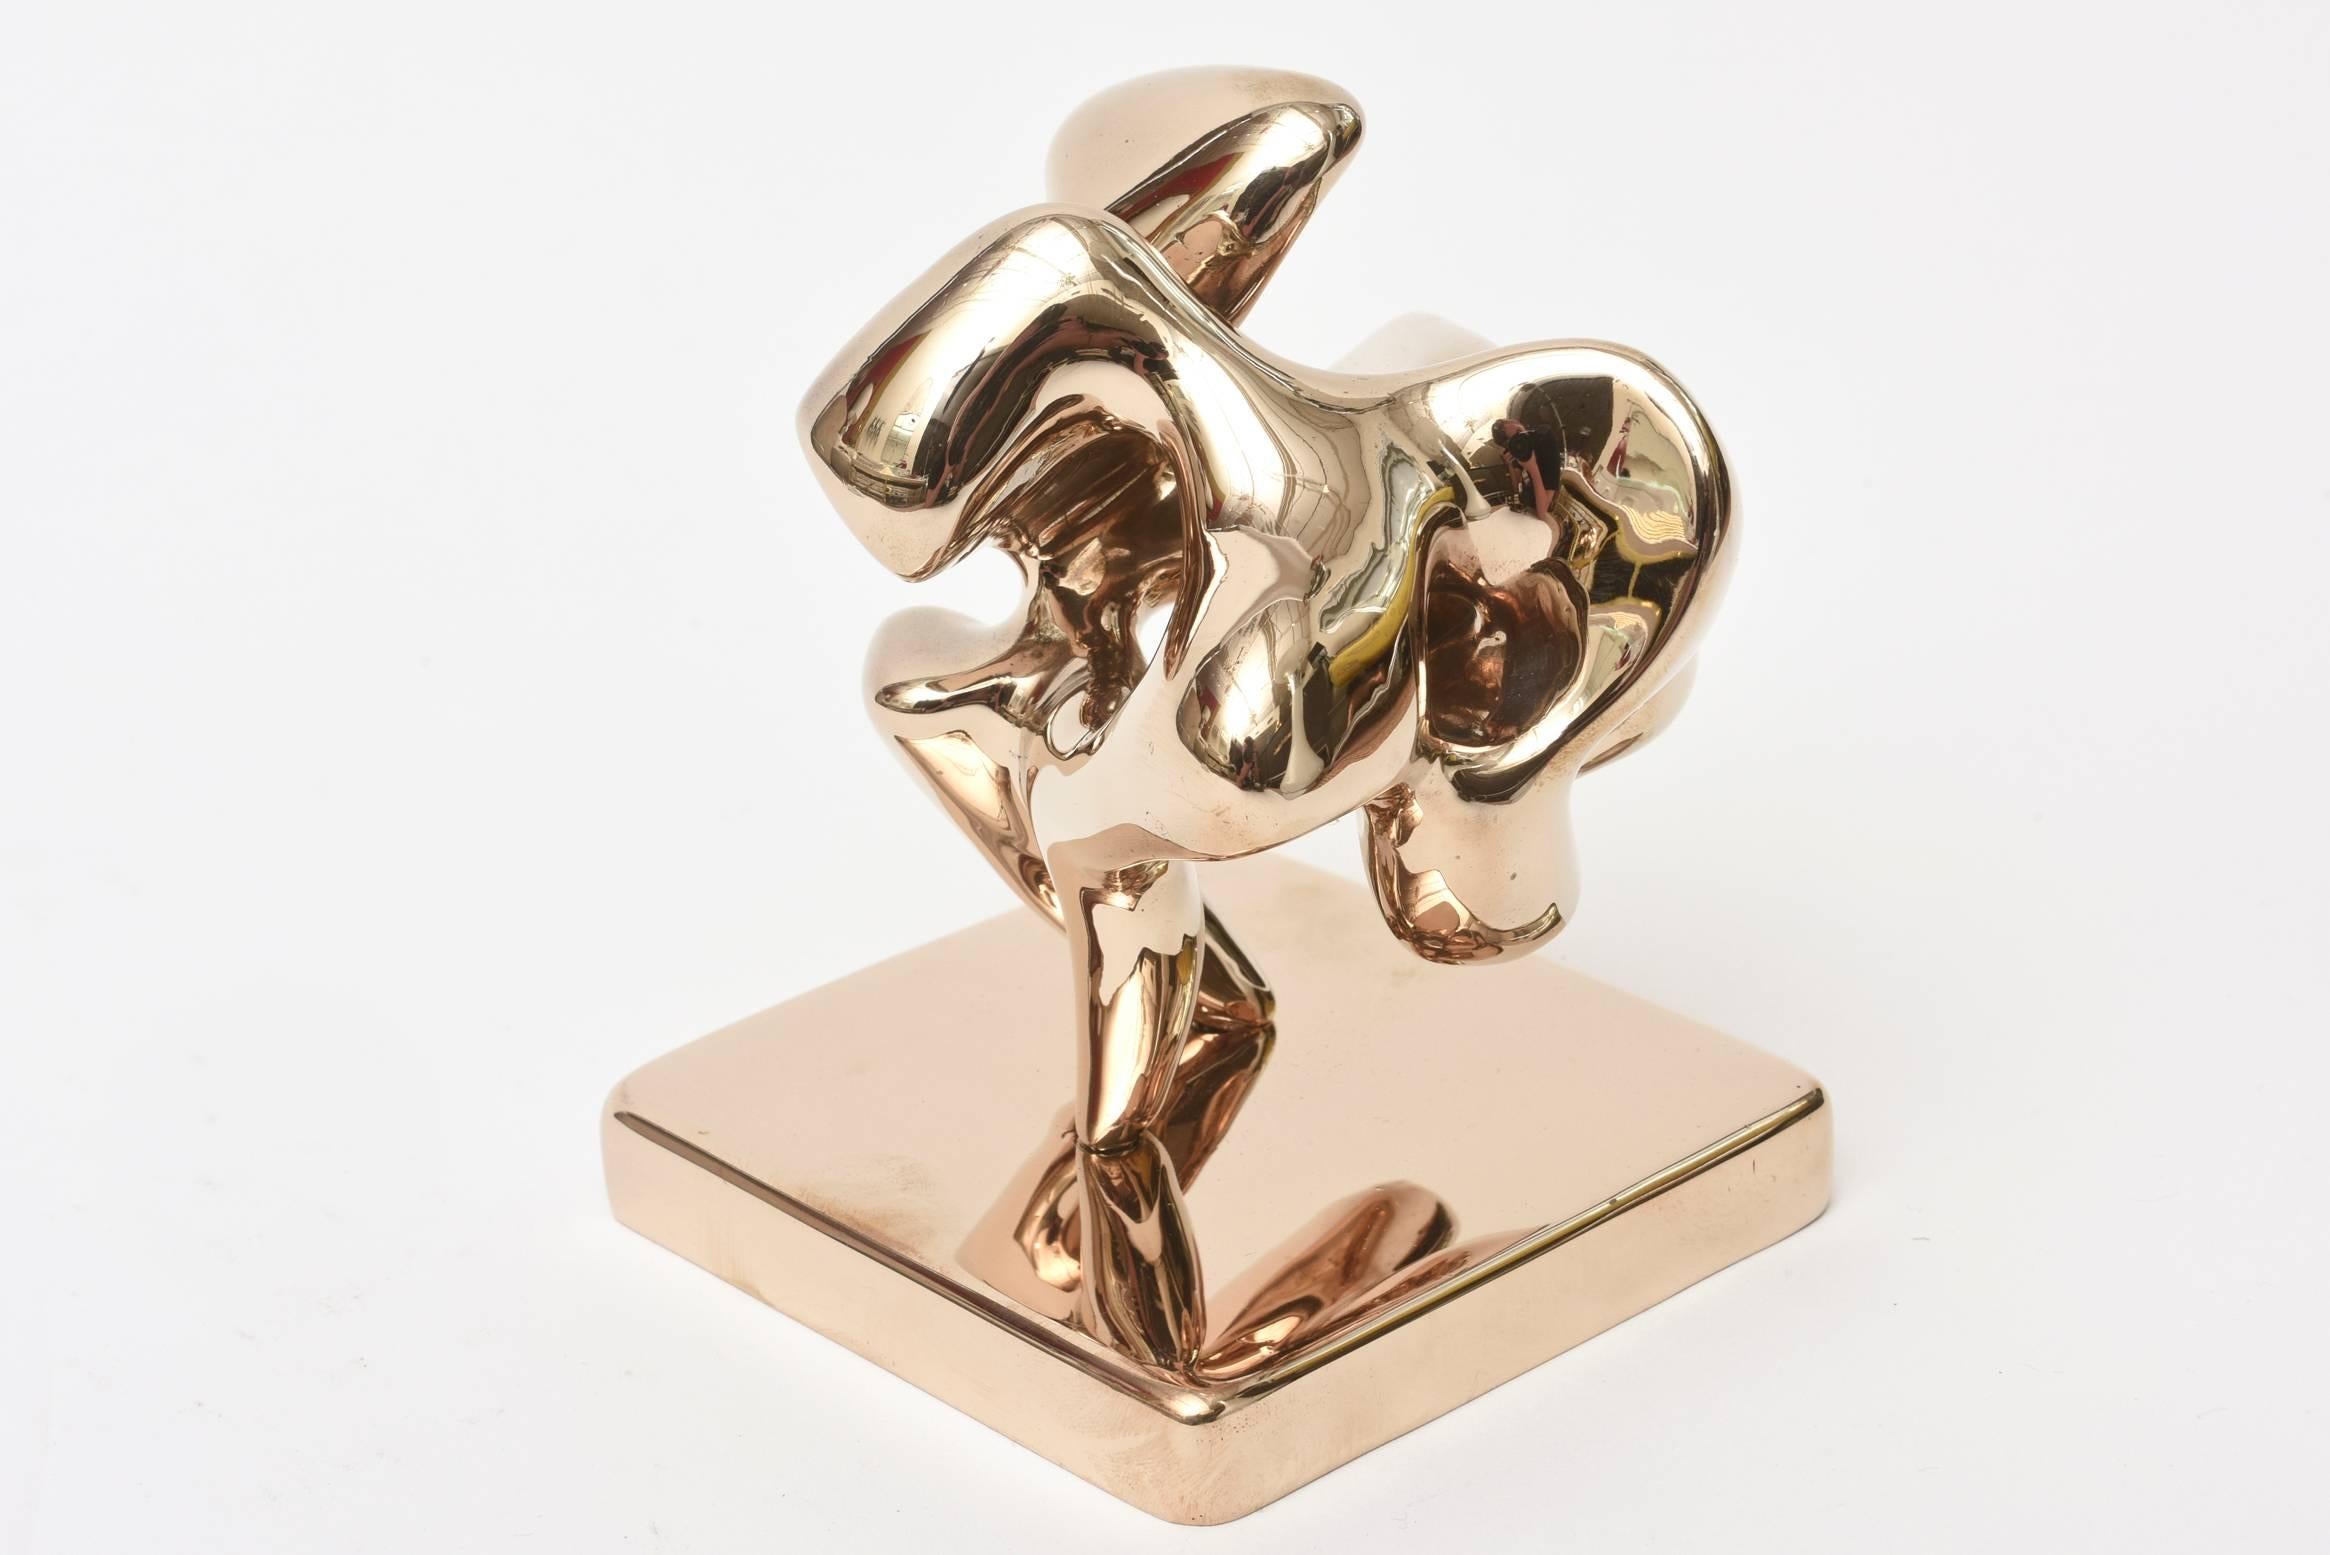 This limited edition signed Bronze abstract wonderful sculpture is 111/V11.
Meaning 3/7. It is by a NY master sculptor who studied at UCLA and whose name is Eli Karpel His life period was 1916-1998. He was also a painter.
It has a sensuality to it